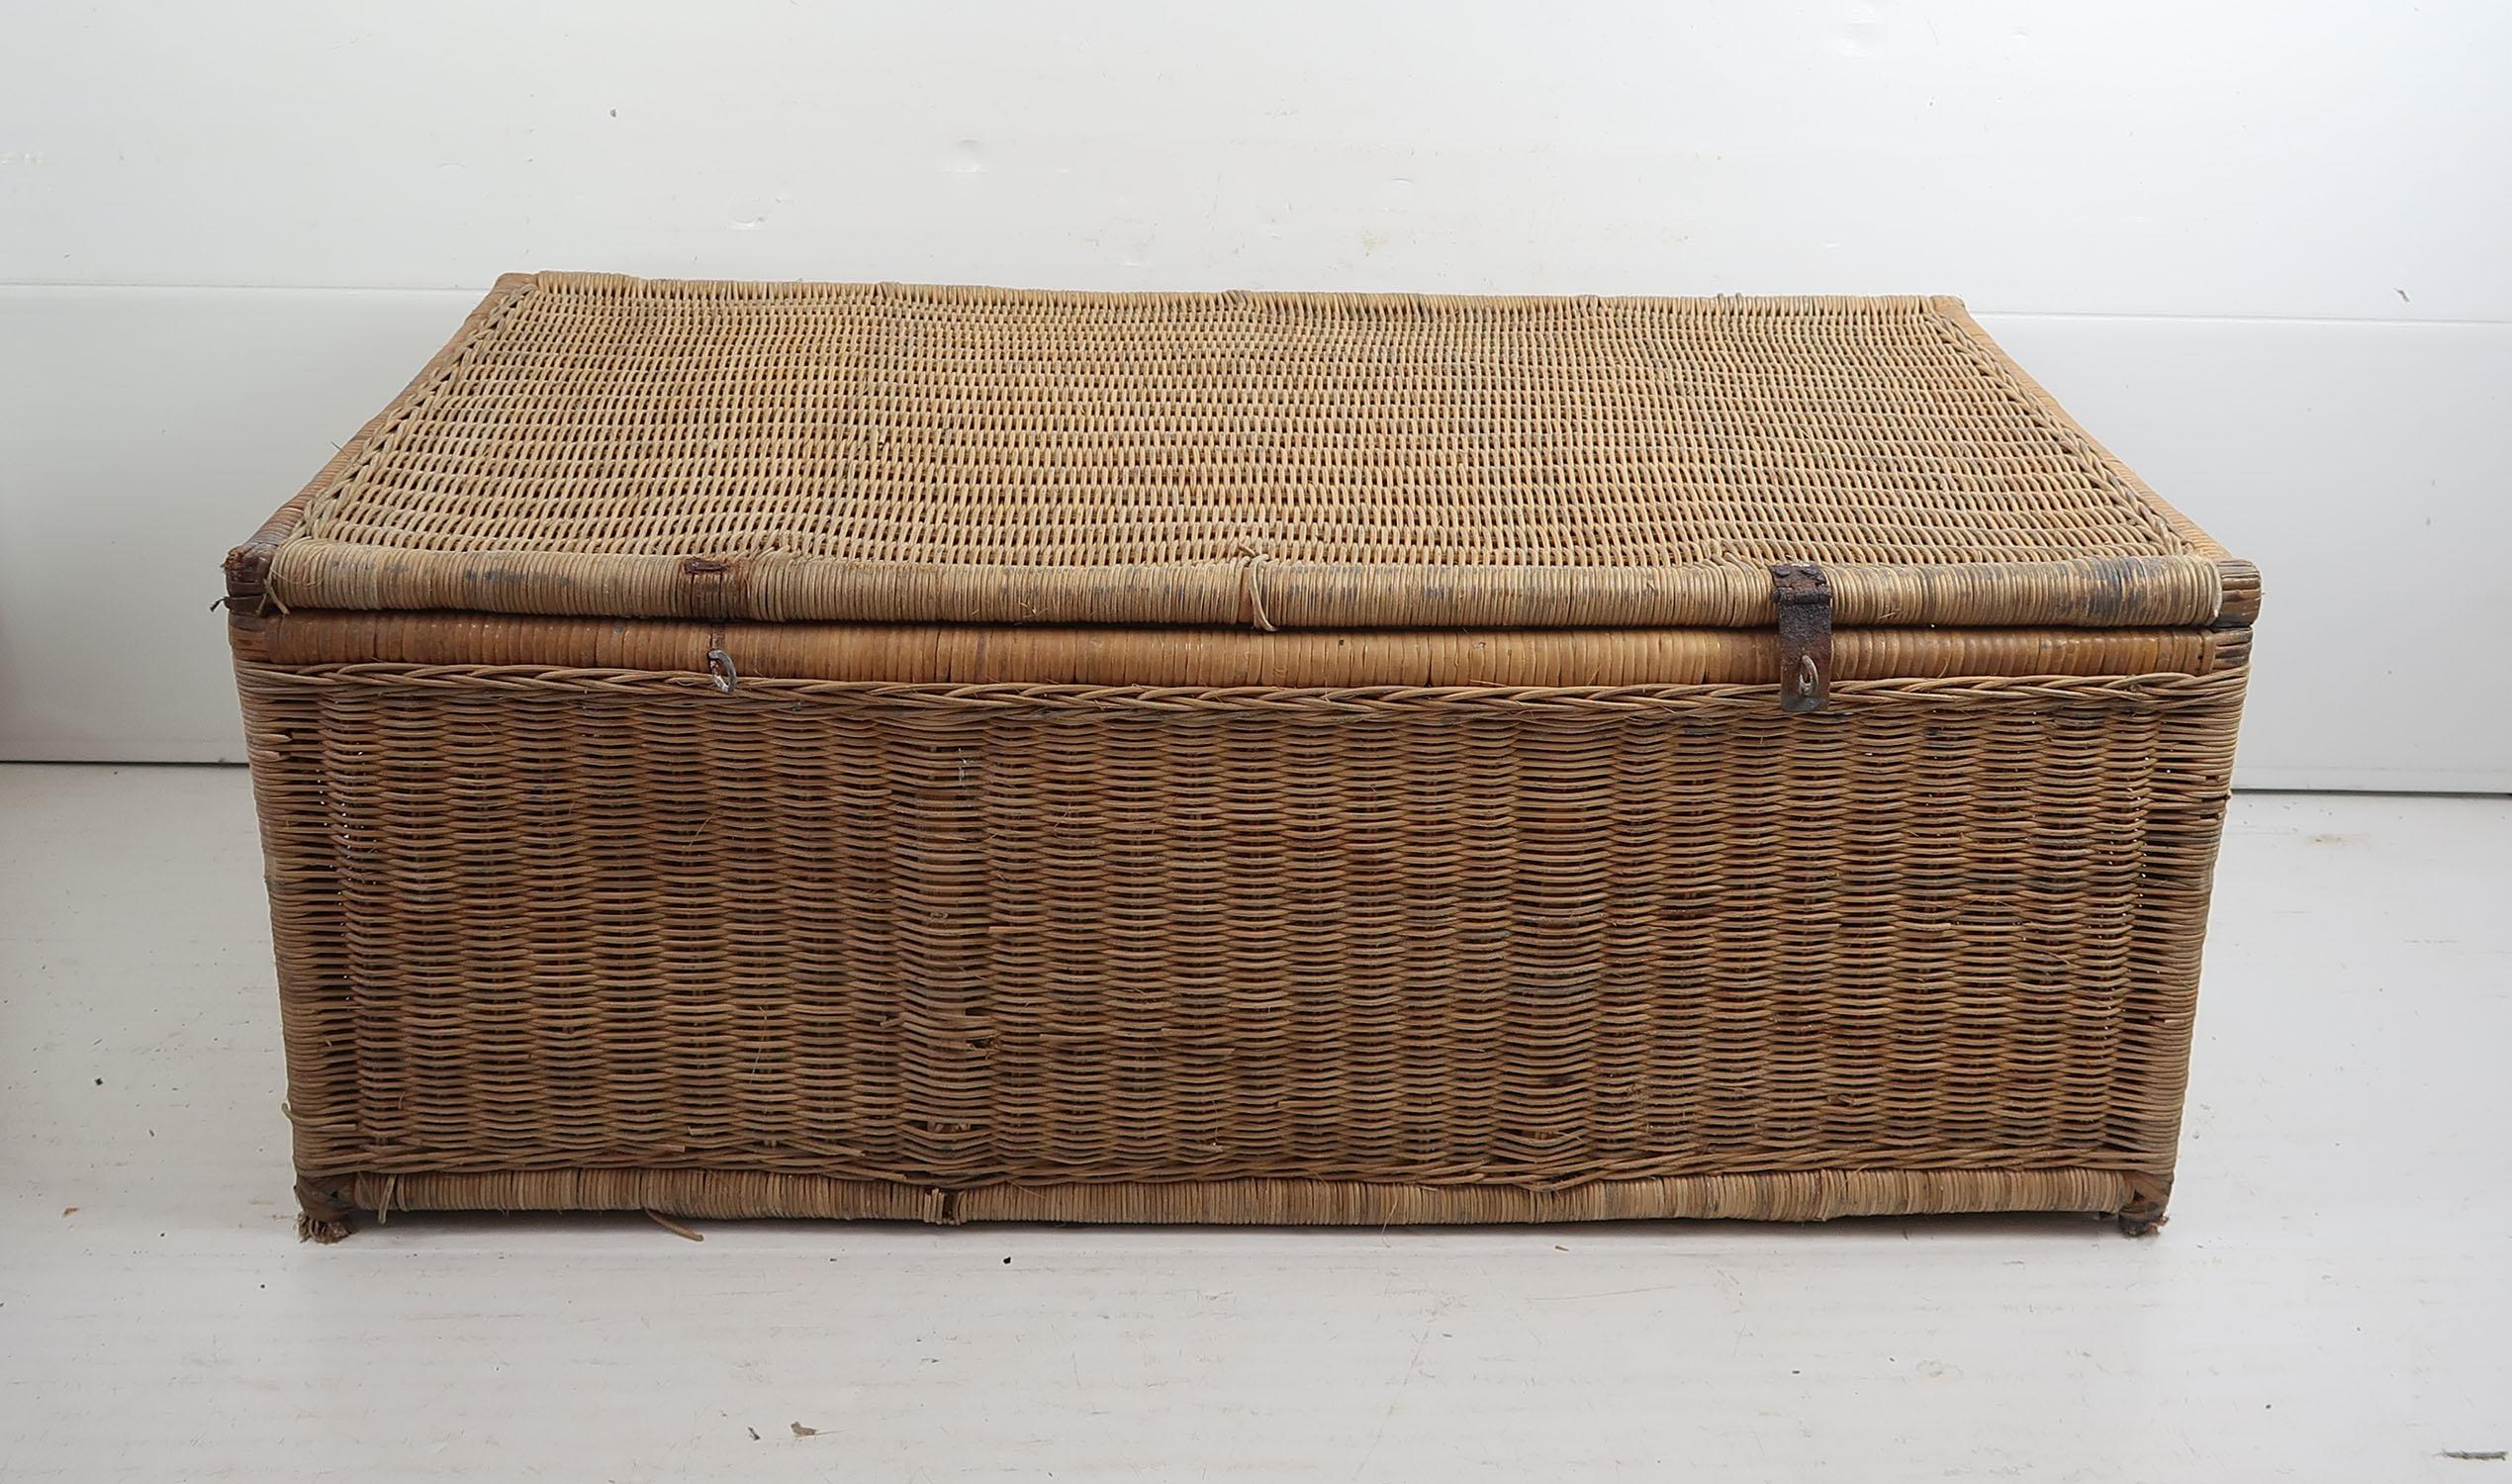 Great rattan travelling trunk.

Lovely color.

It had been originally covered in painted canvas cover. It gives us the provenance.

Wear and tear consistent with age and use

Traces of grey paint in a few places particularly the